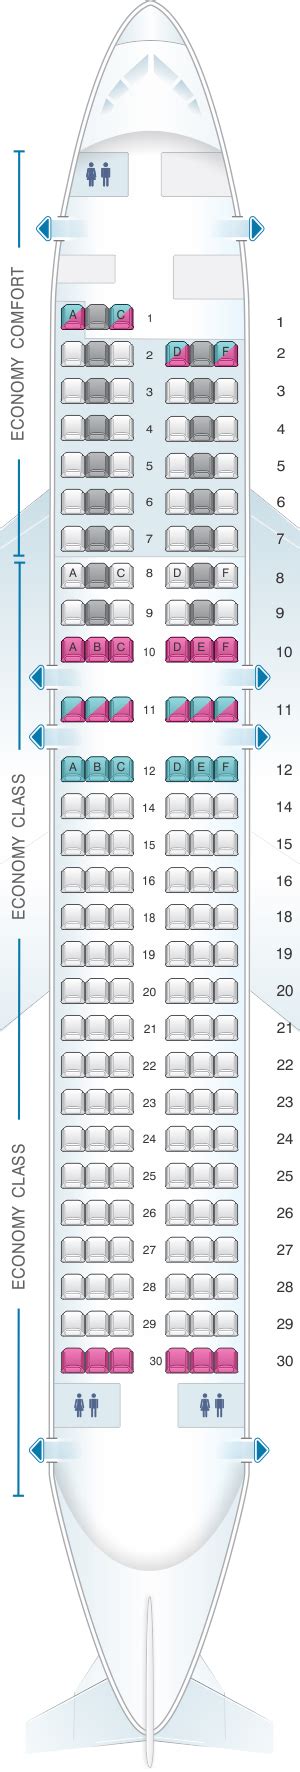 Alitalia Airbus Industrie A Seat Map Two Birds Home